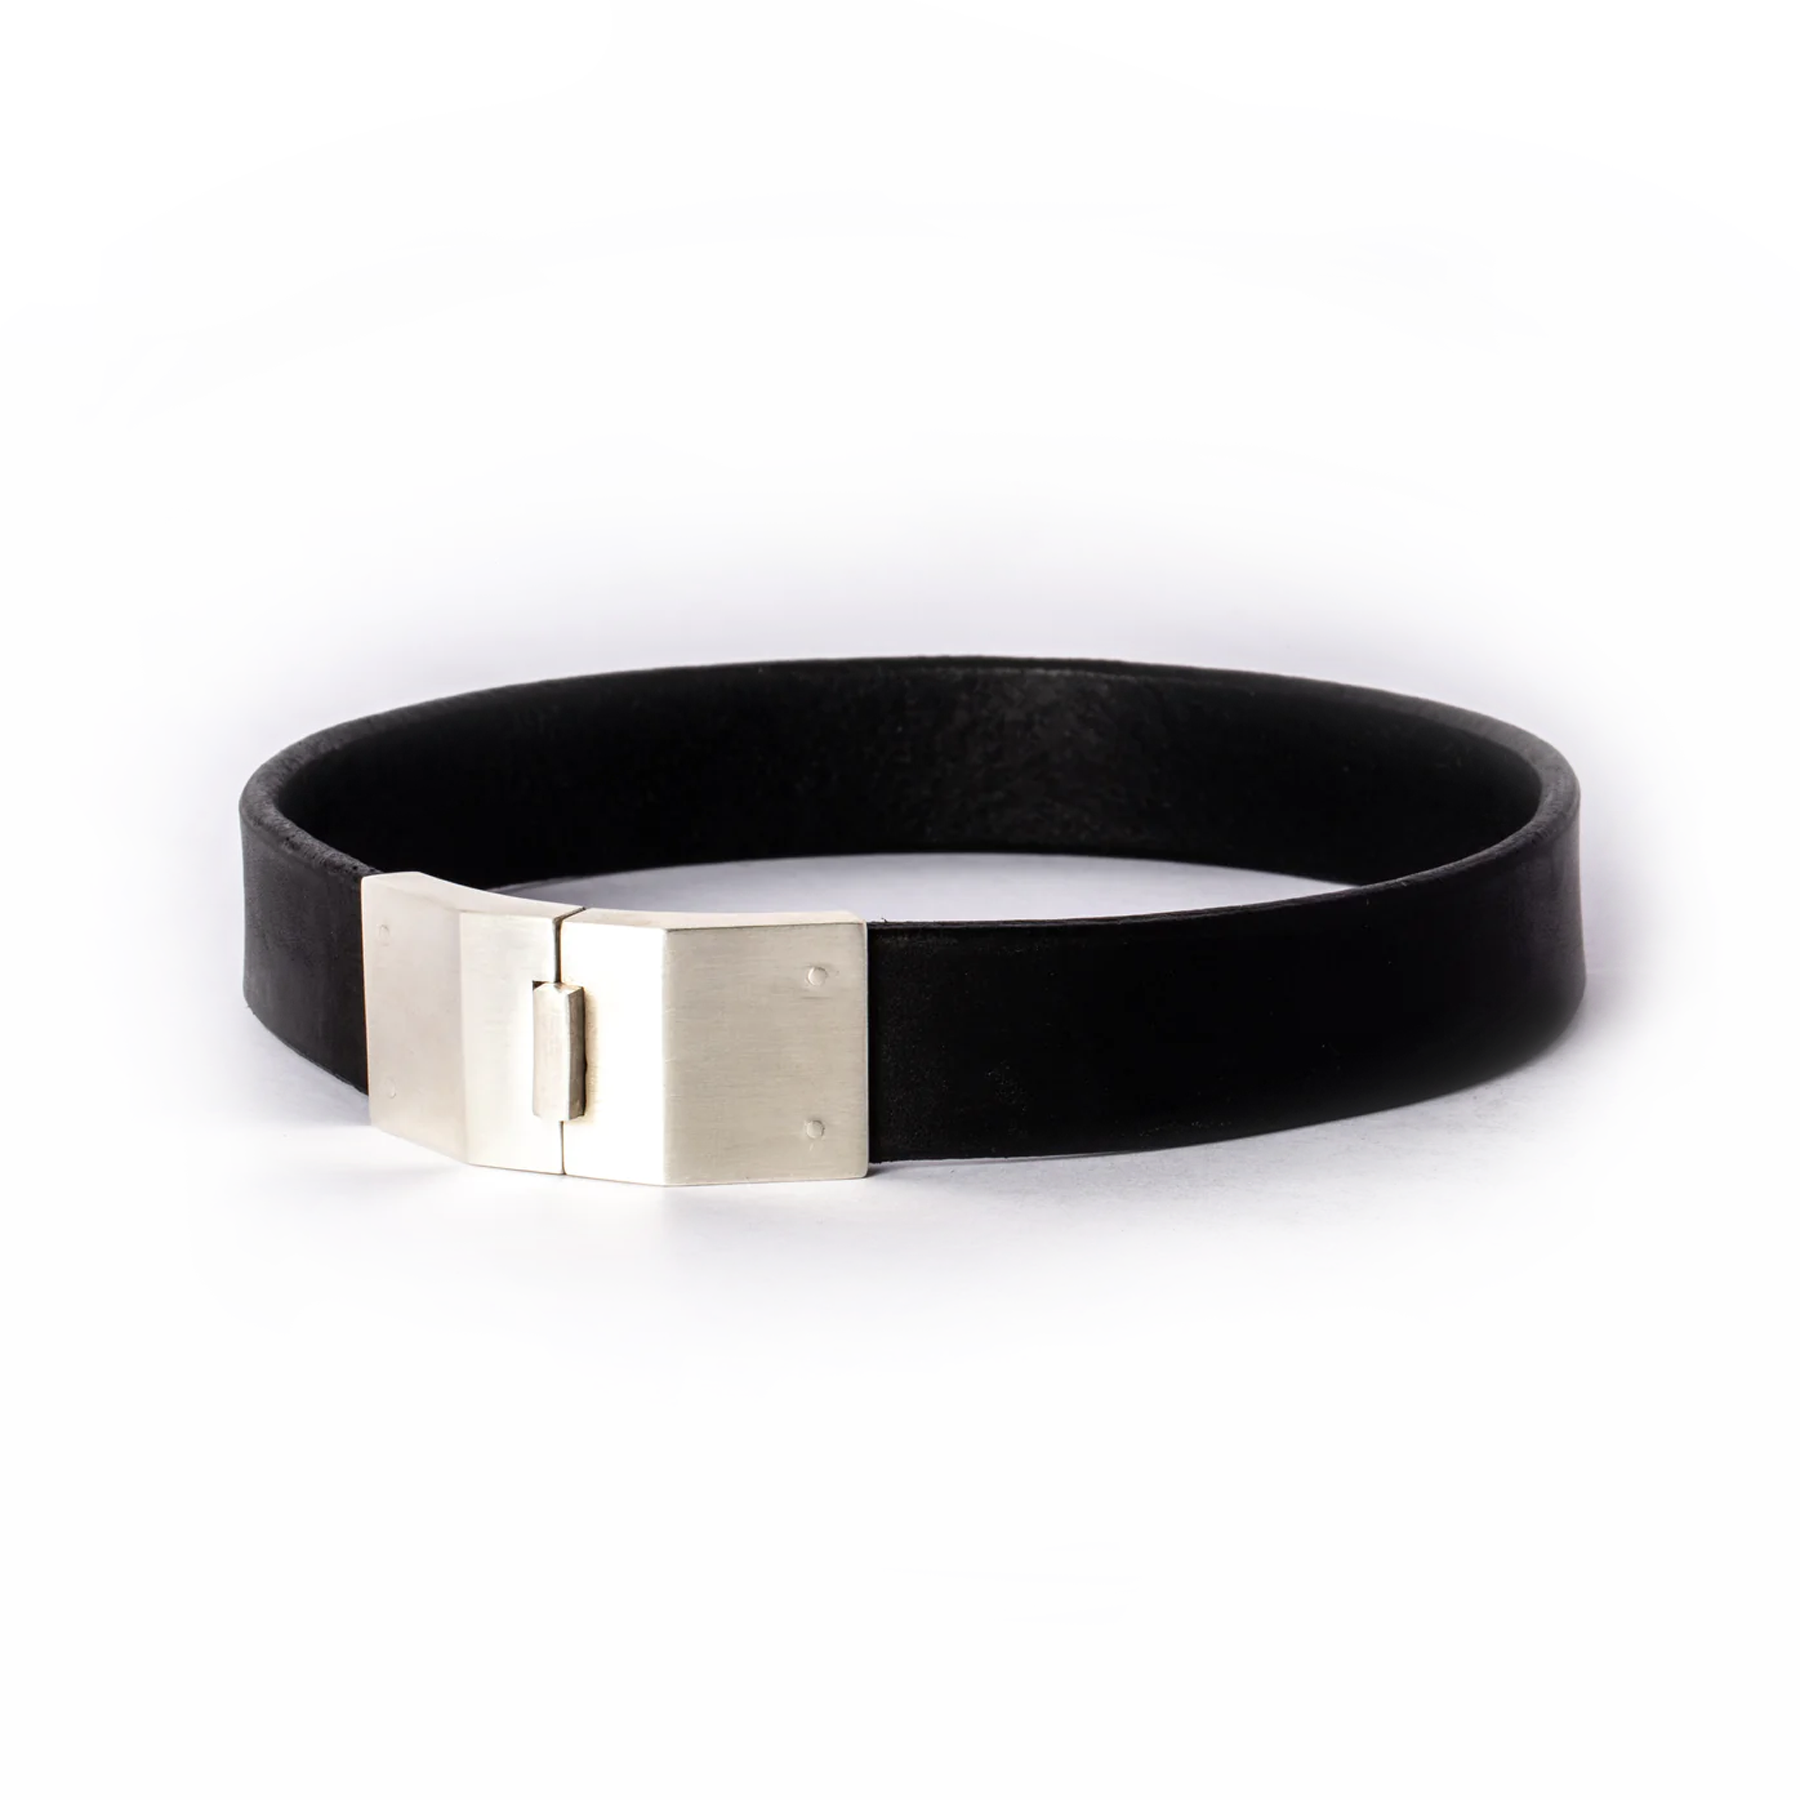 Narrow box lock leather choker by Parts of 4 - silver plated brass & leather